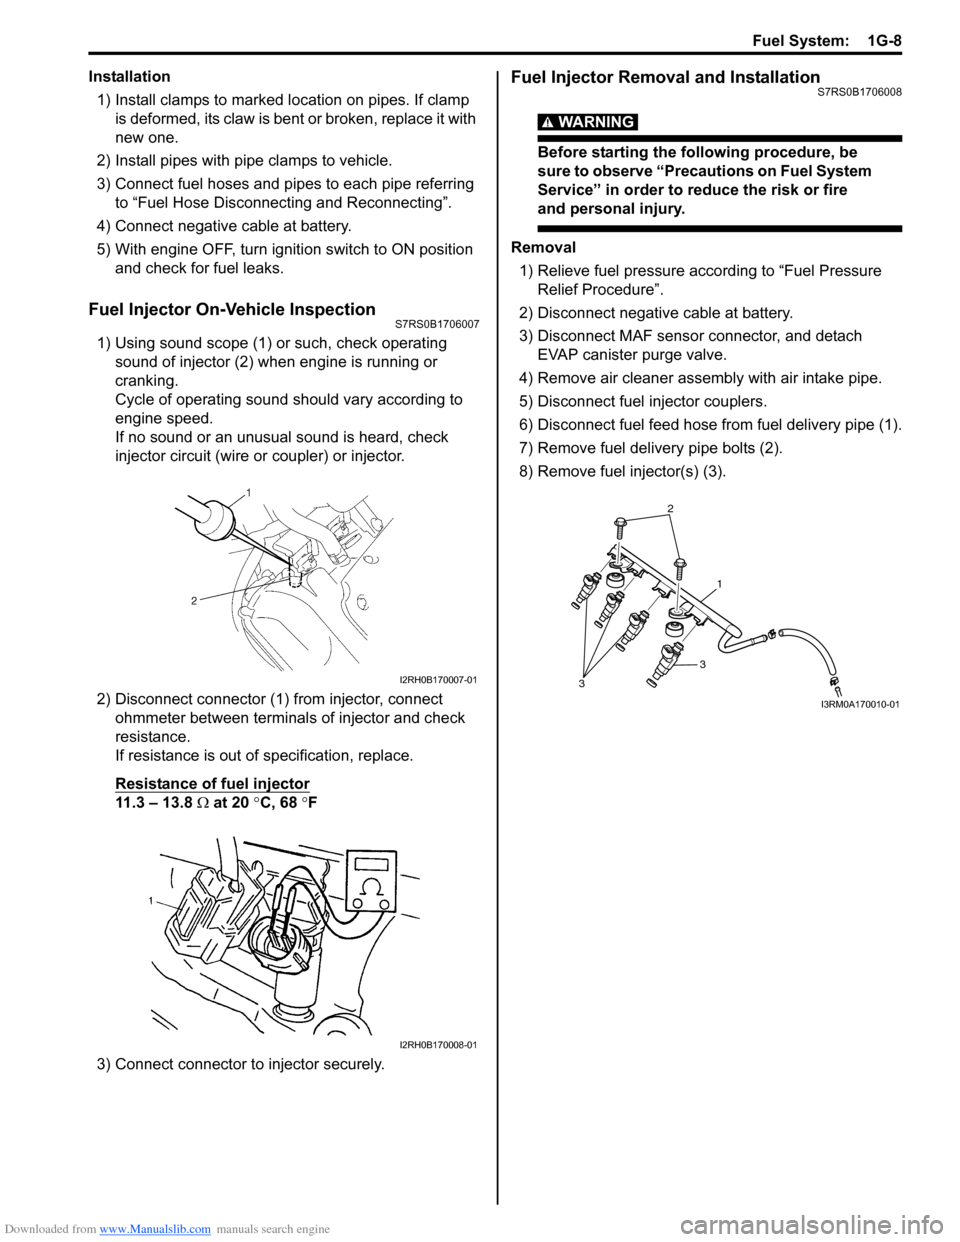 SUZUKI SWIFT 2006 2.G Service Owners Guide Downloaded from www.Manualslib.com manuals search engine Fuel System:  1G-8
Installation1) Install clamps to marked location on pipes. If clamp  is deformed, its claw is bent  or broken, replace it wi